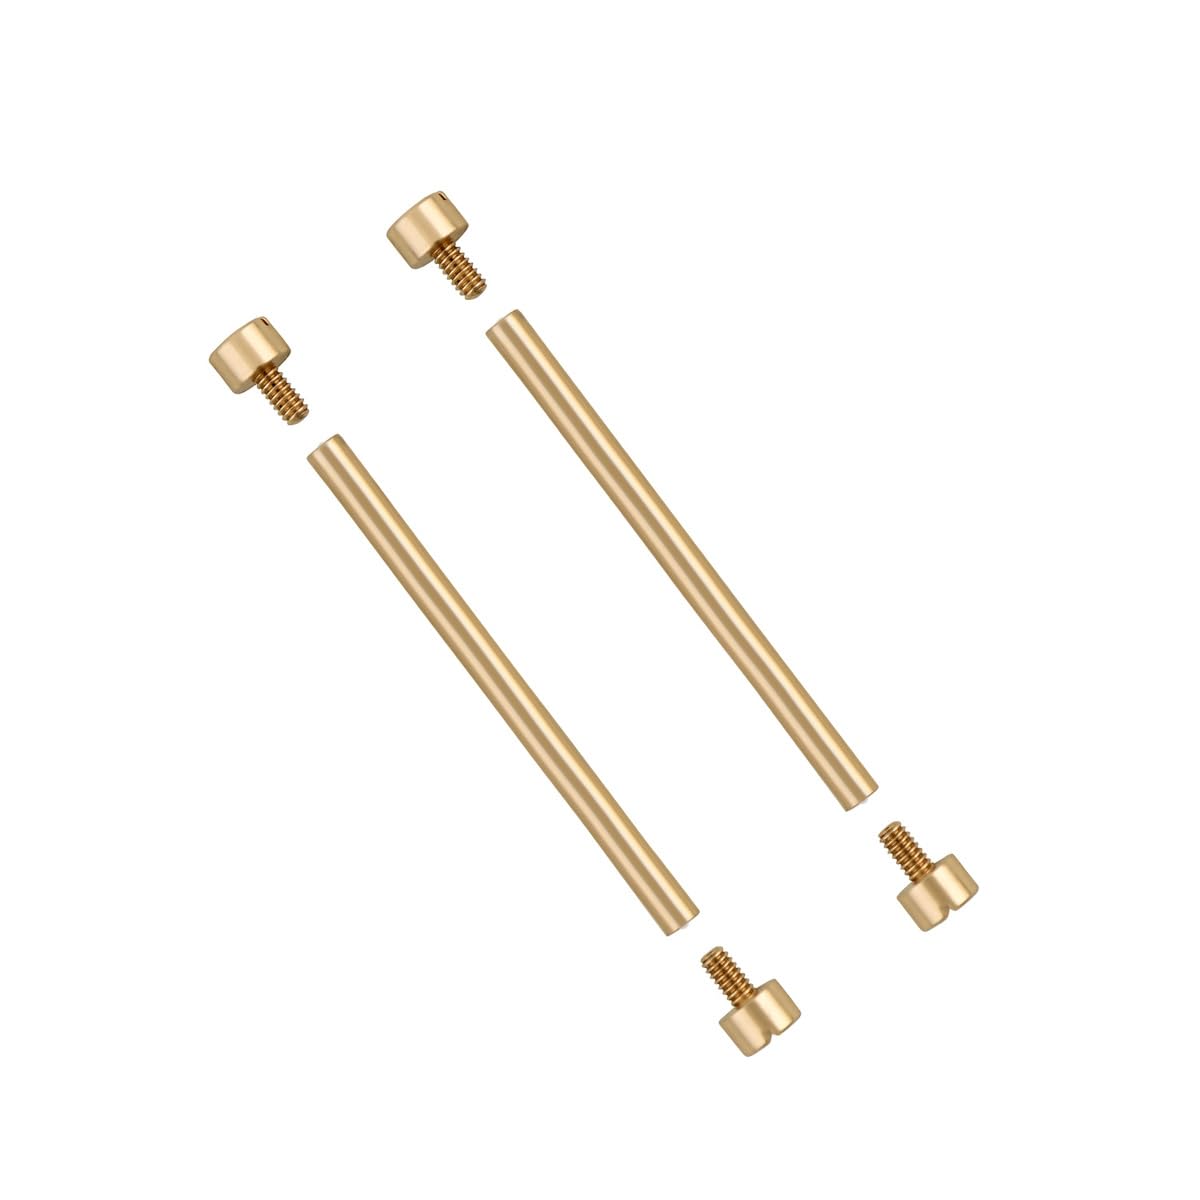 Ewatchparts 2 + 4 SCREW & TUBE (PINS) IN 27MM WATCH STRAP GOLD COLOR